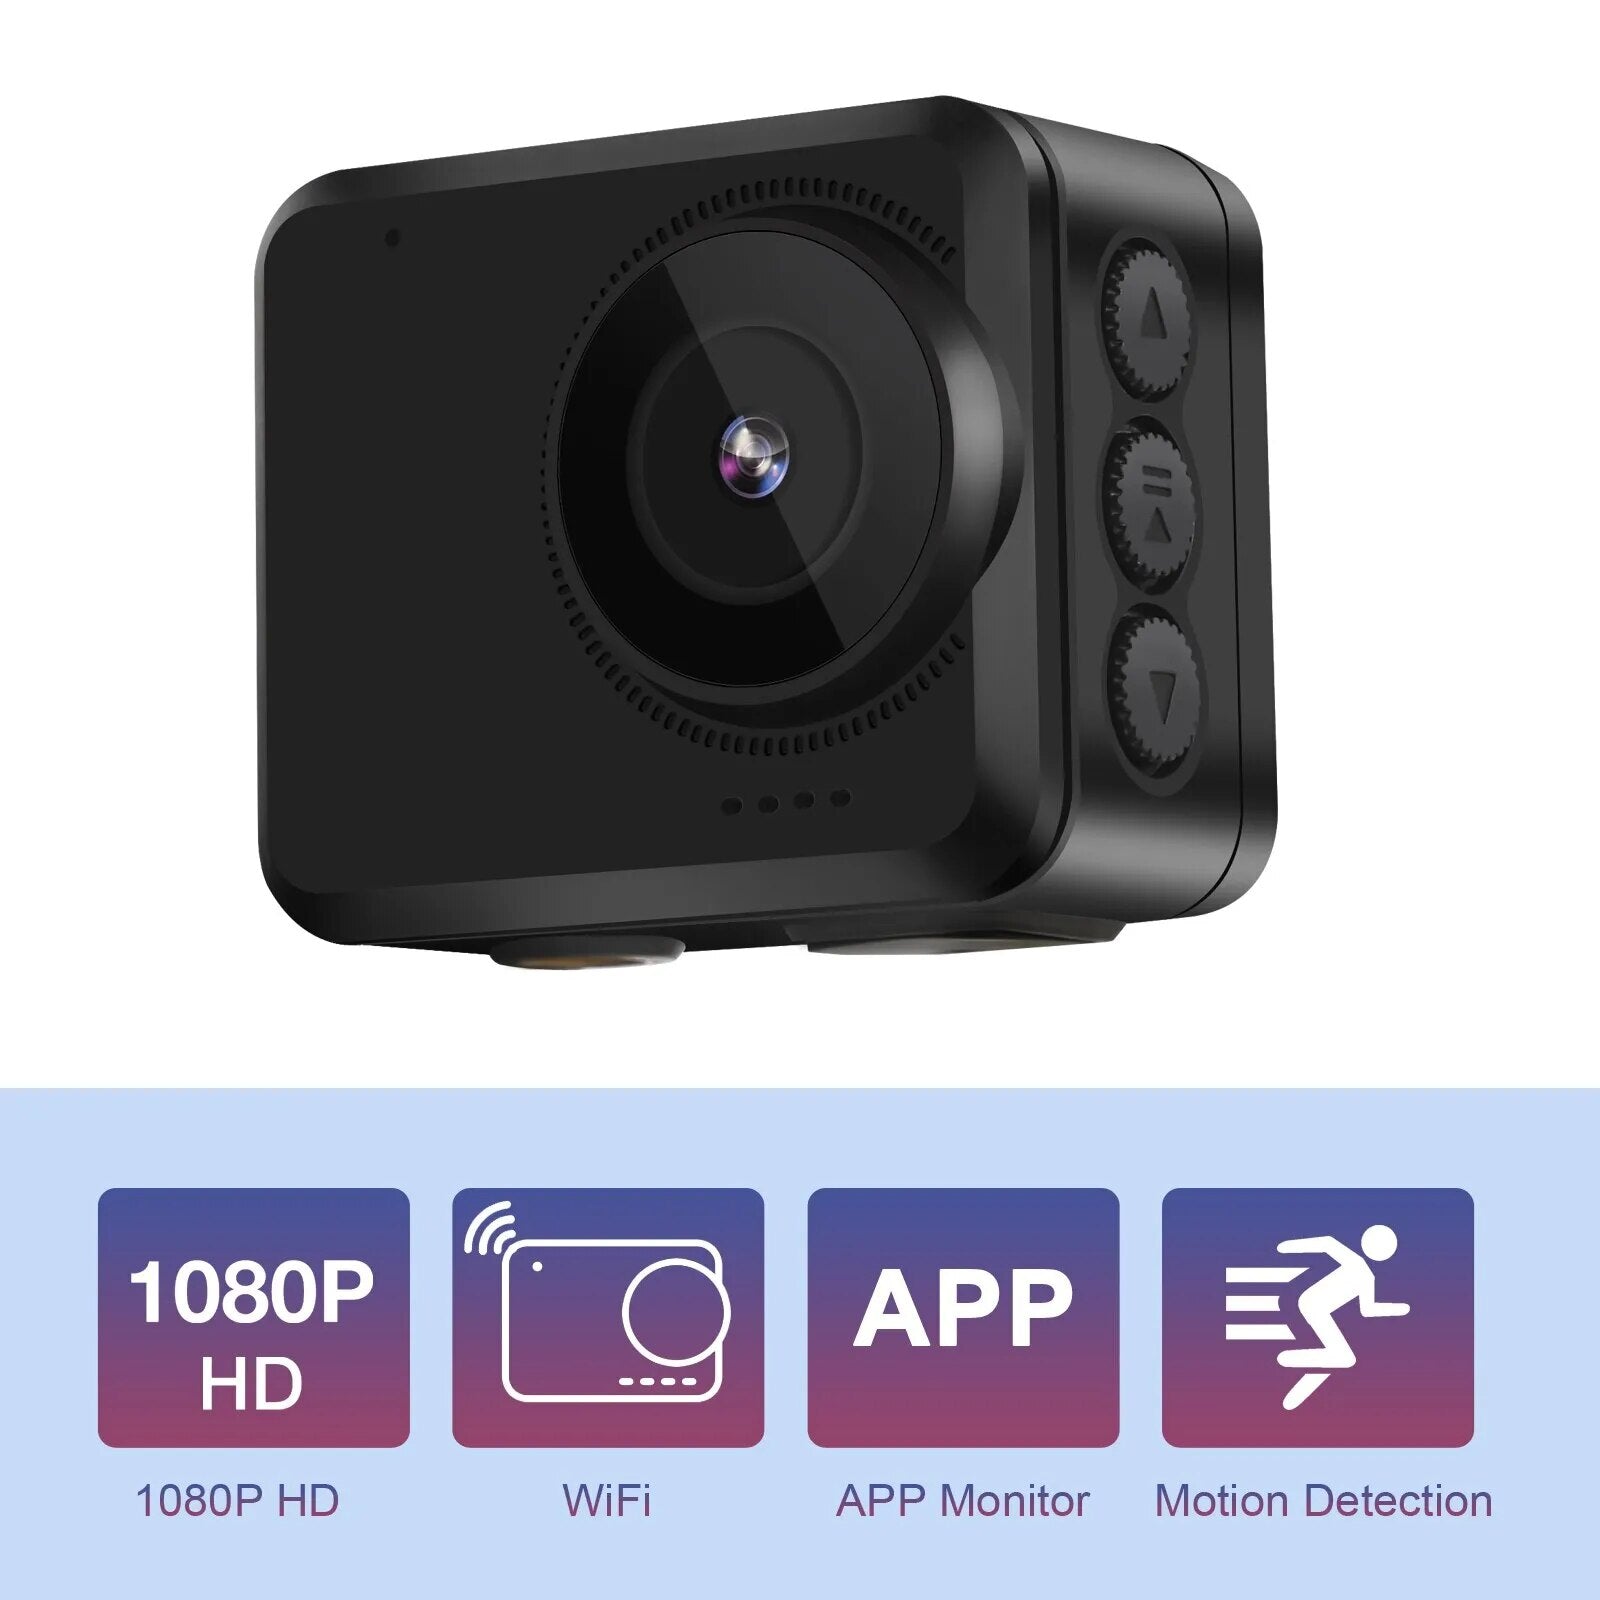 A35 64GB Digital Mini Camera Sports DV Webcam 600mAH Motor Bicycle Action Video Recording Motion Detection for Car Driving Ride